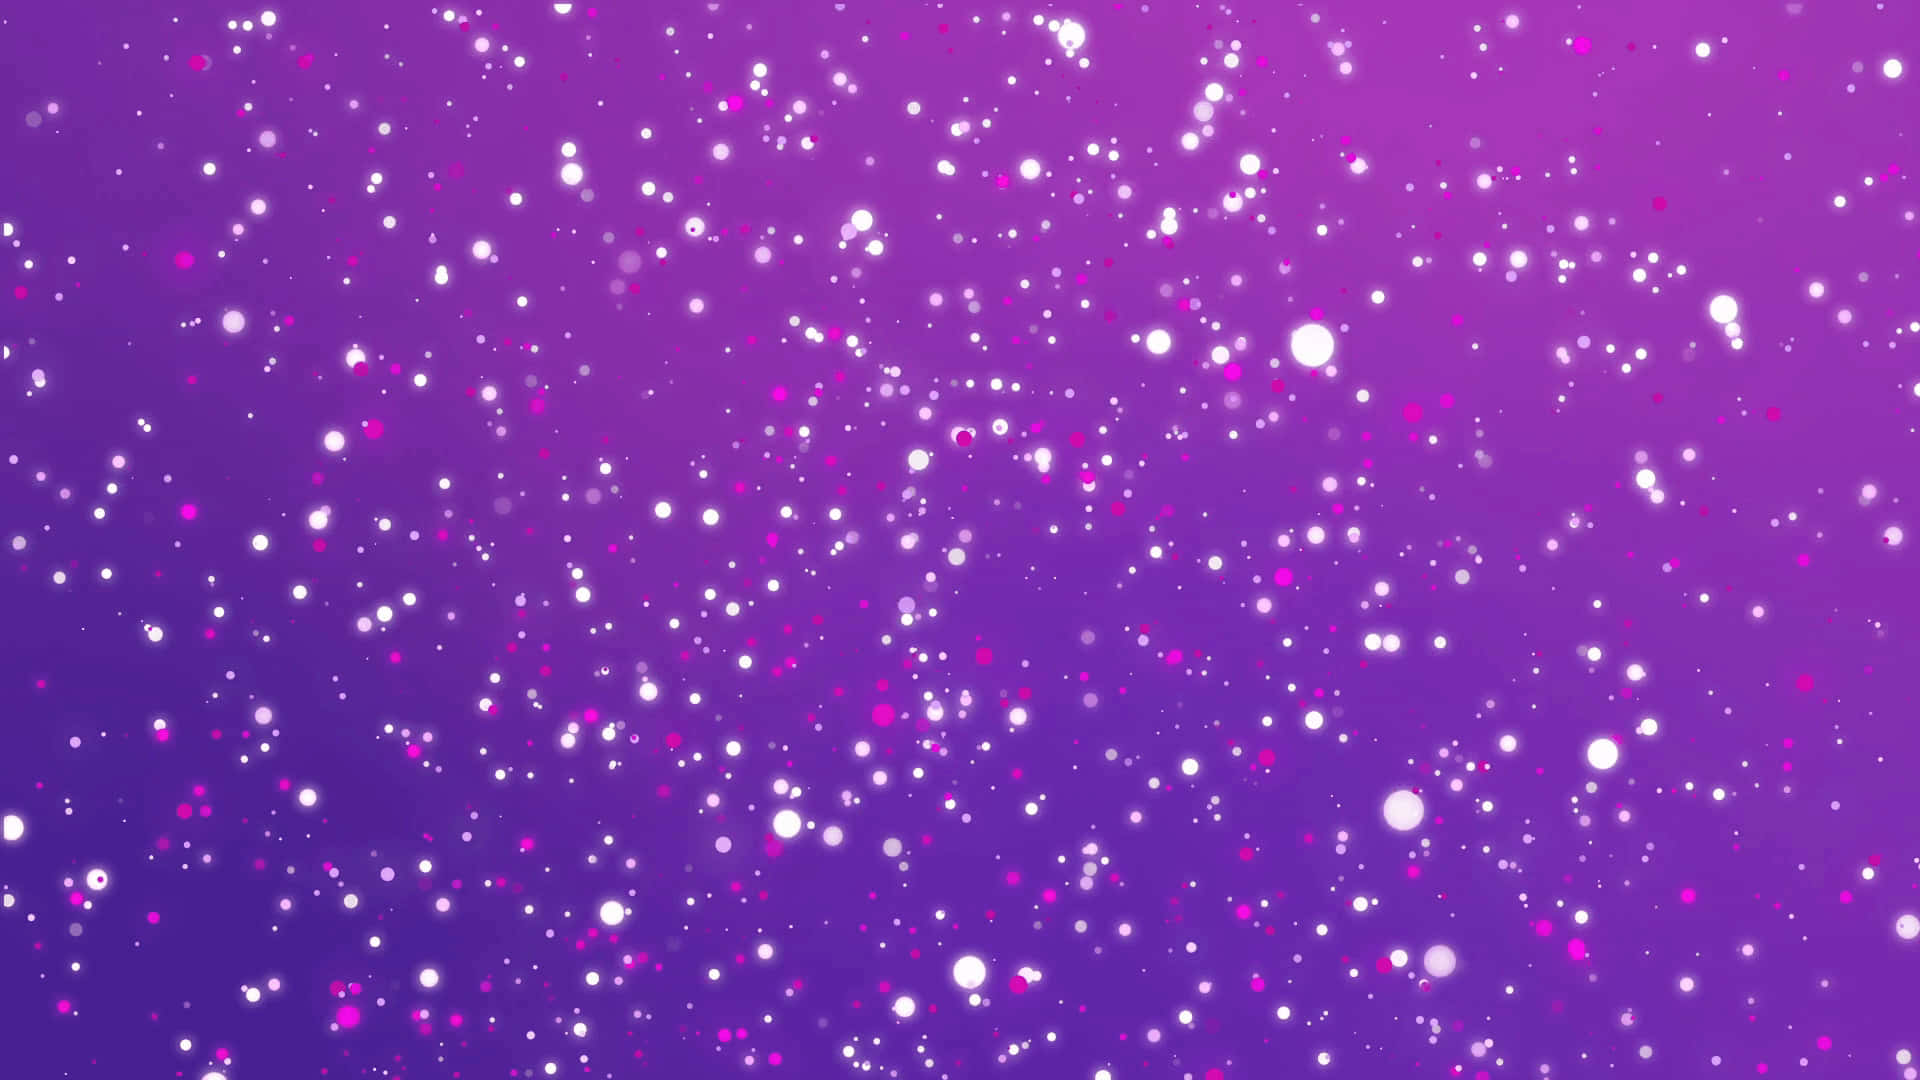 A beautiful abstract purple and pink background with geometric shapes